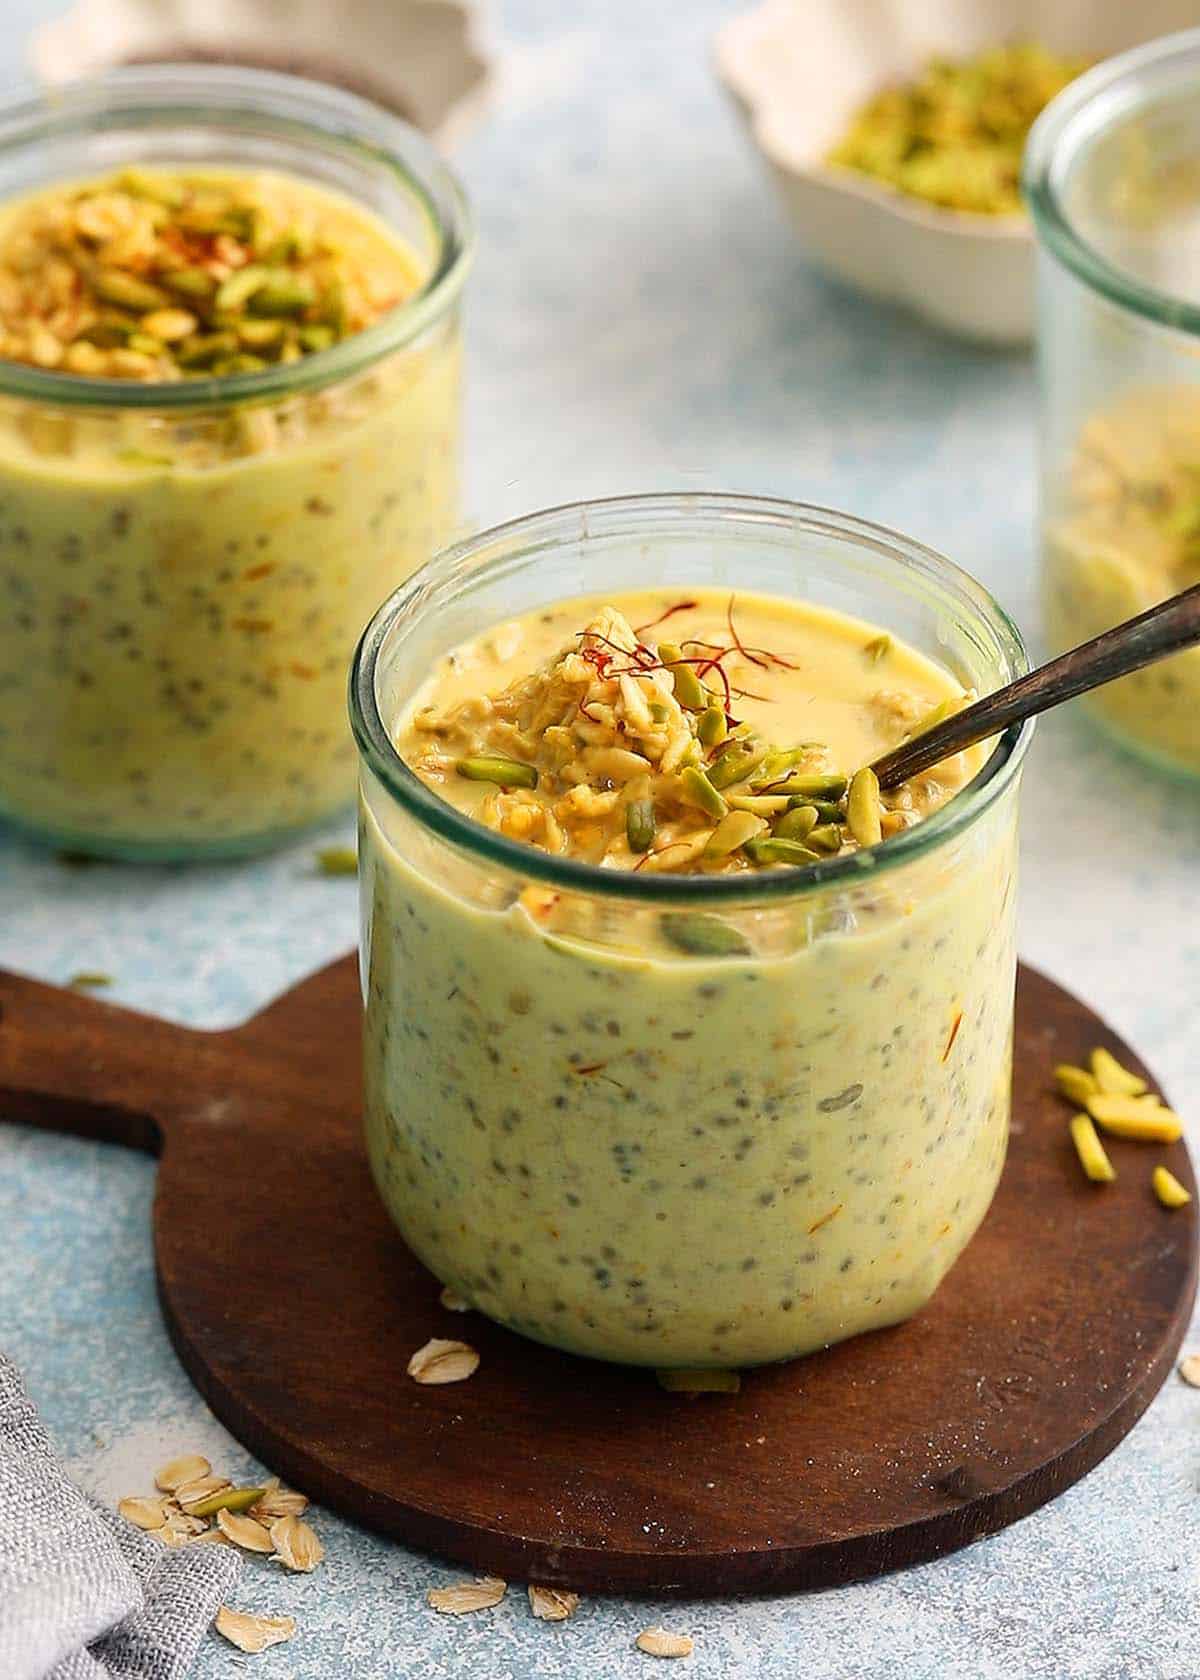 two glass jars filled with yellow colored overnight oats topped with green pistachios.